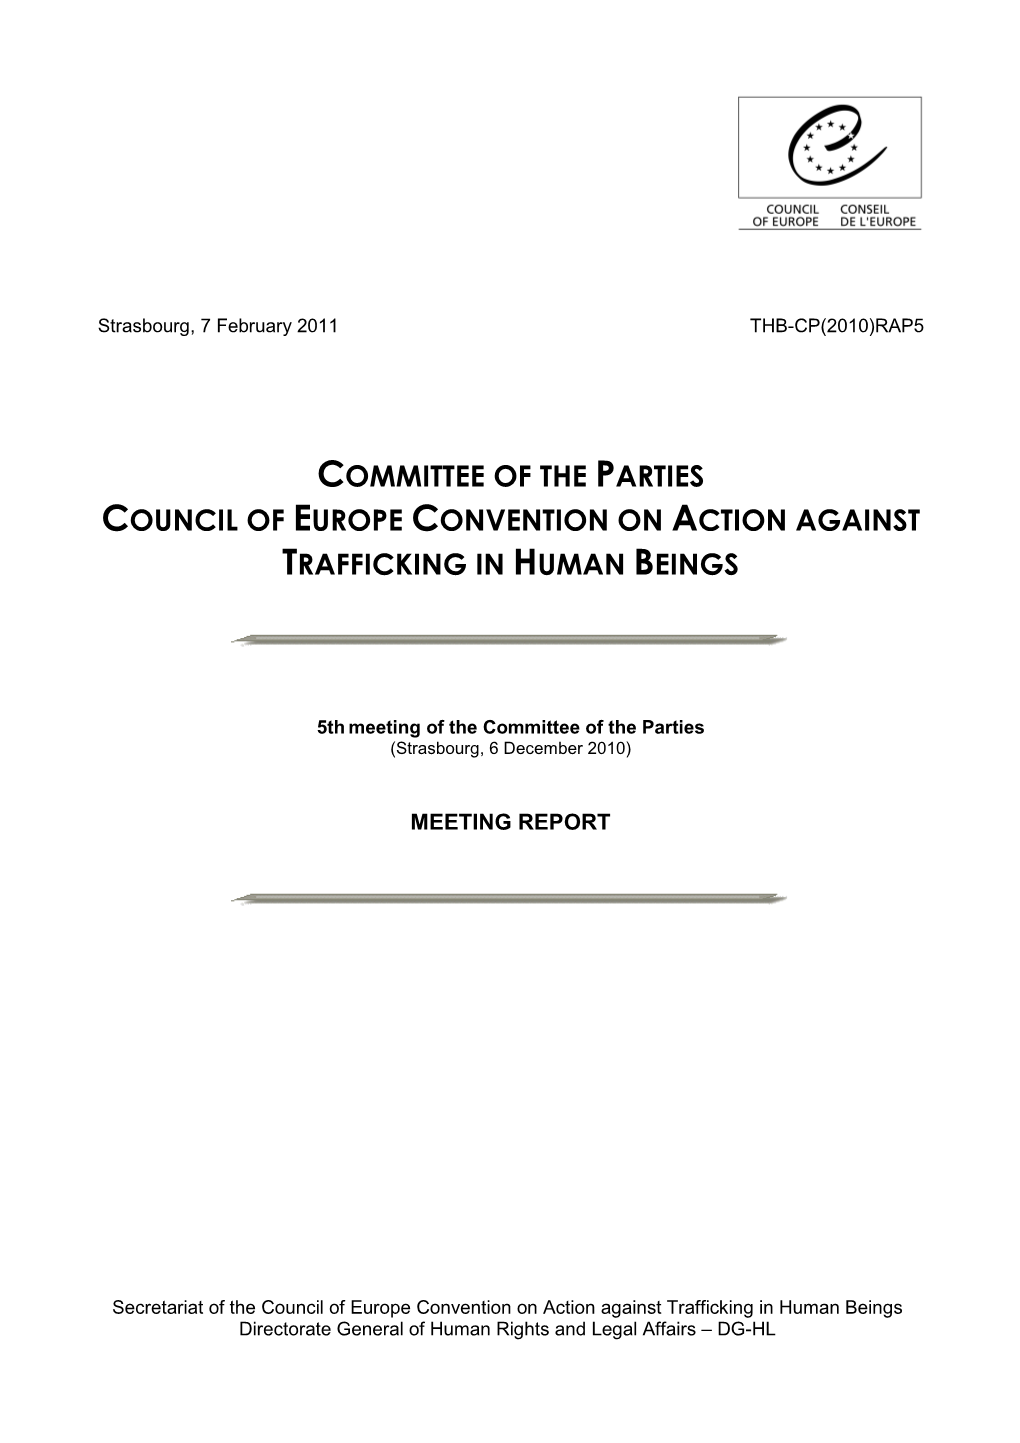 Committee of the Parties Council of Europe Convention on Action Against Trafficking in Human Beings